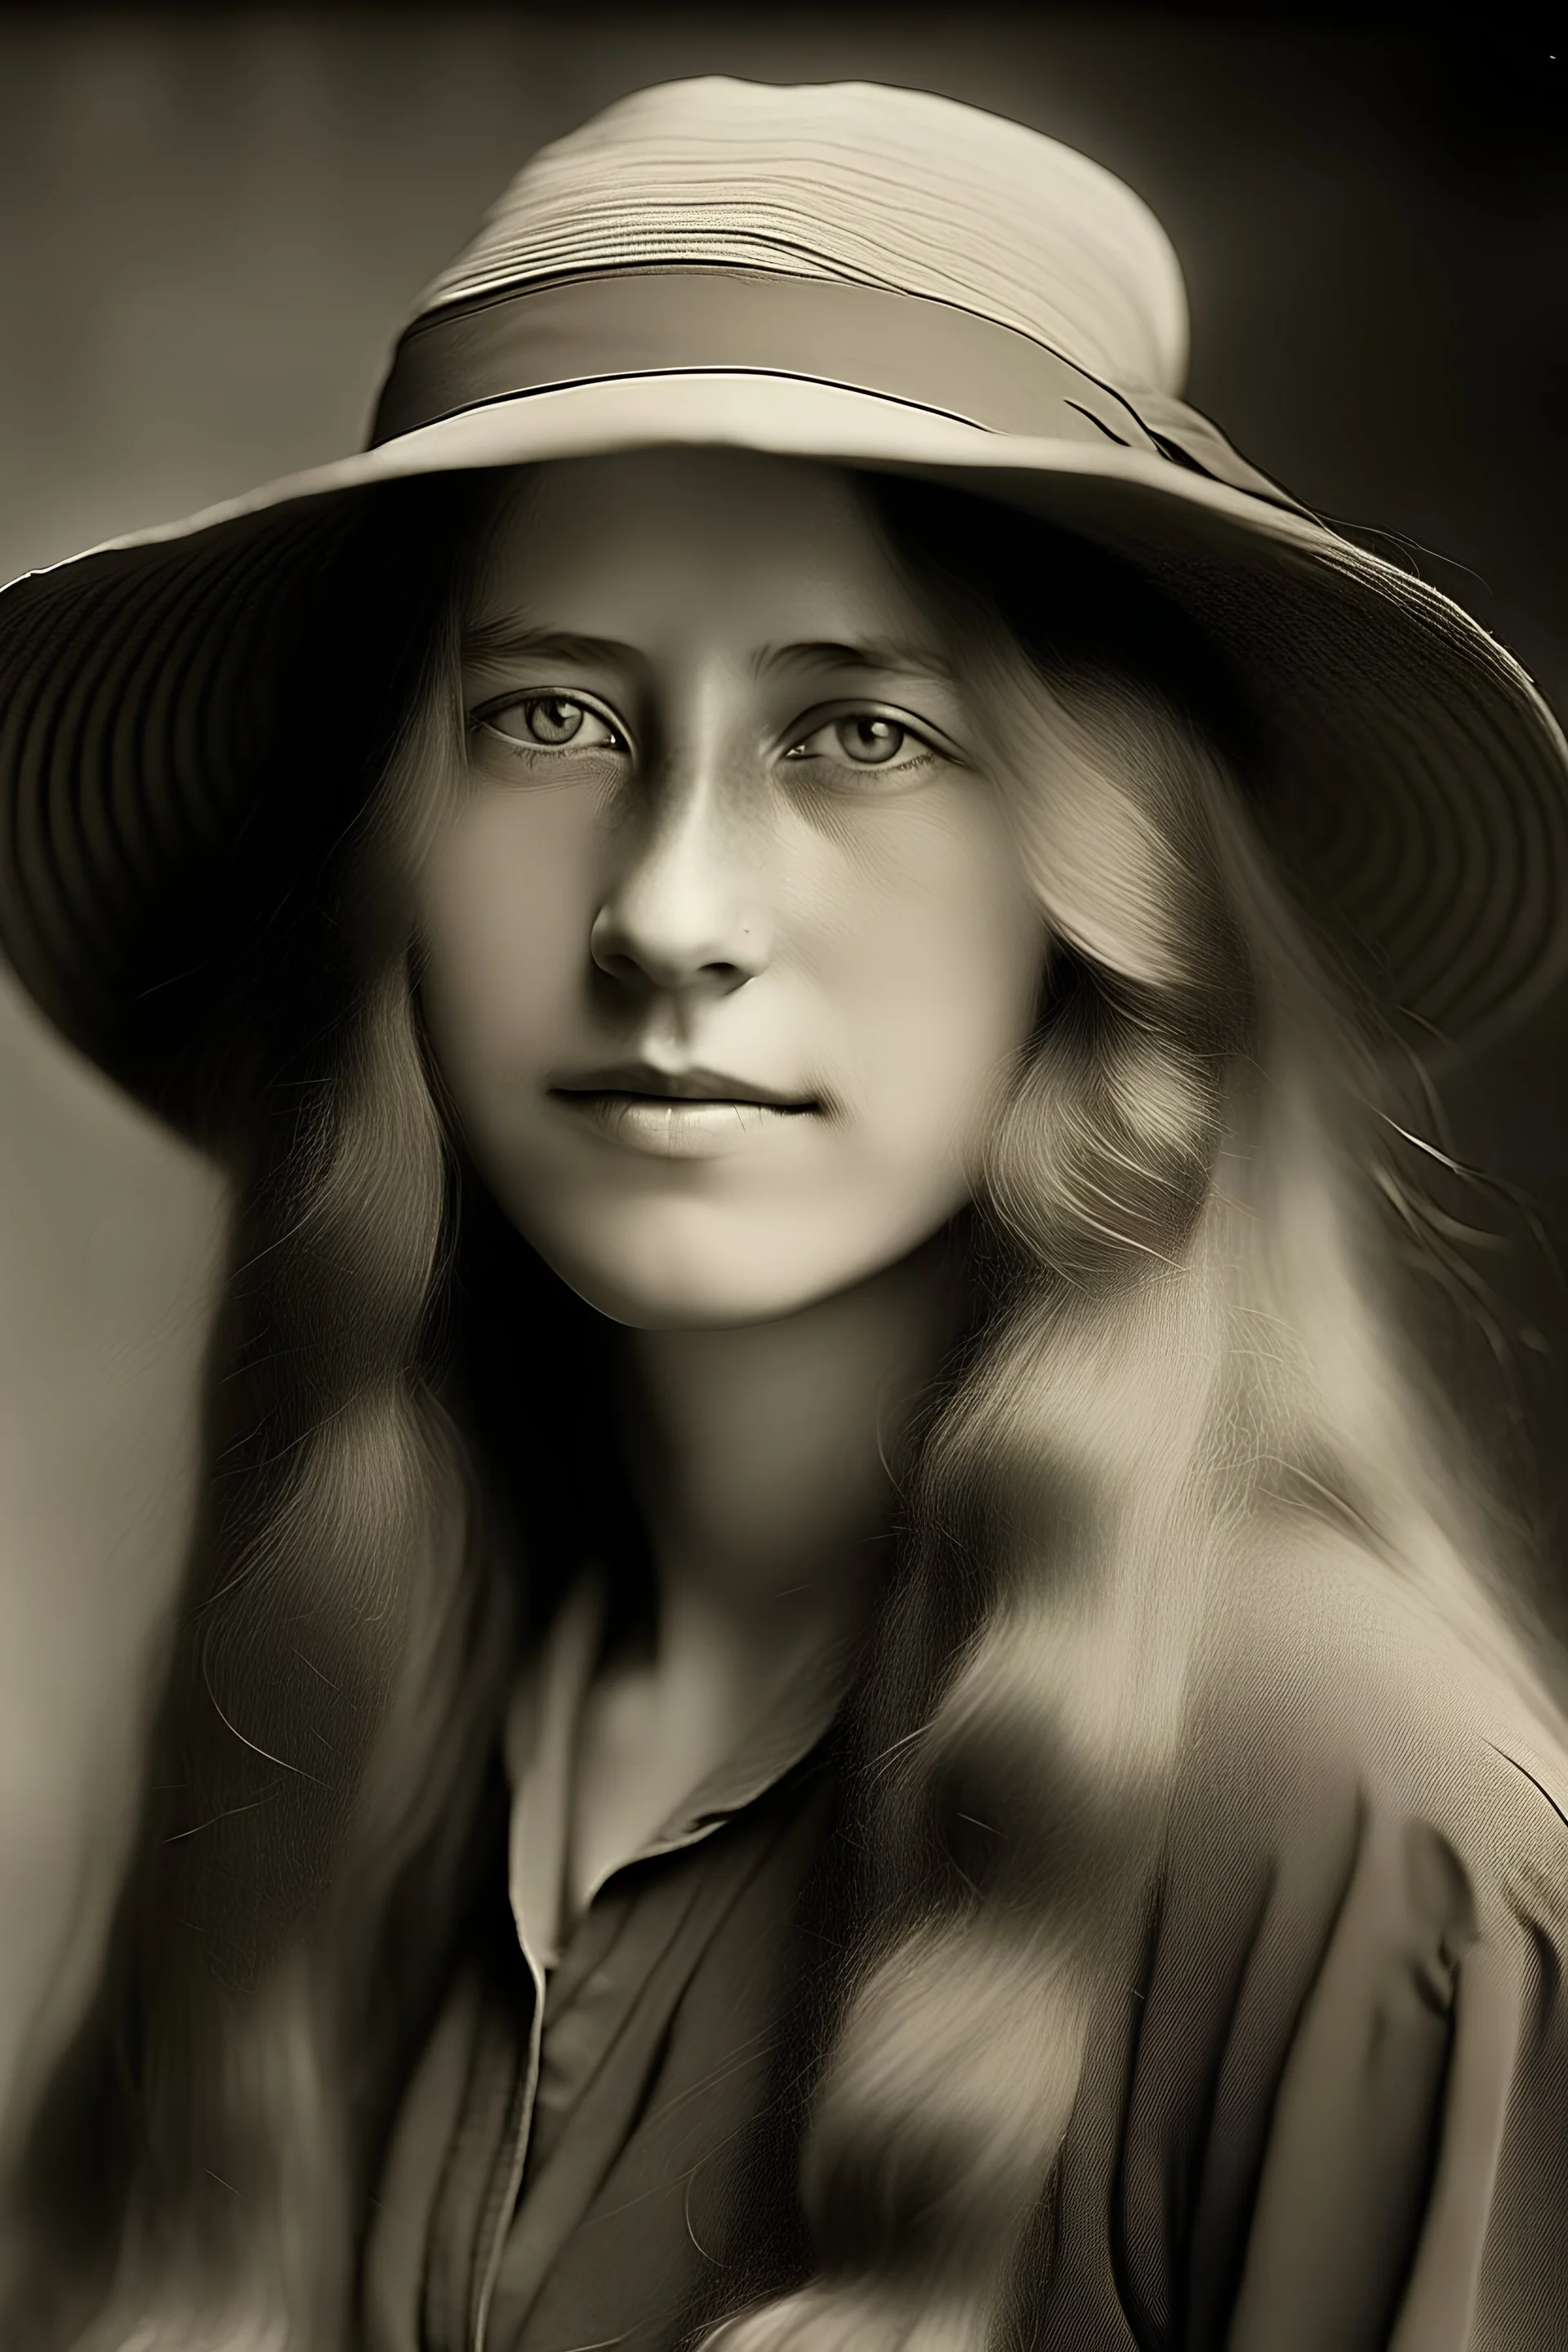 woman 30 years usa1920 long hair blond and hut